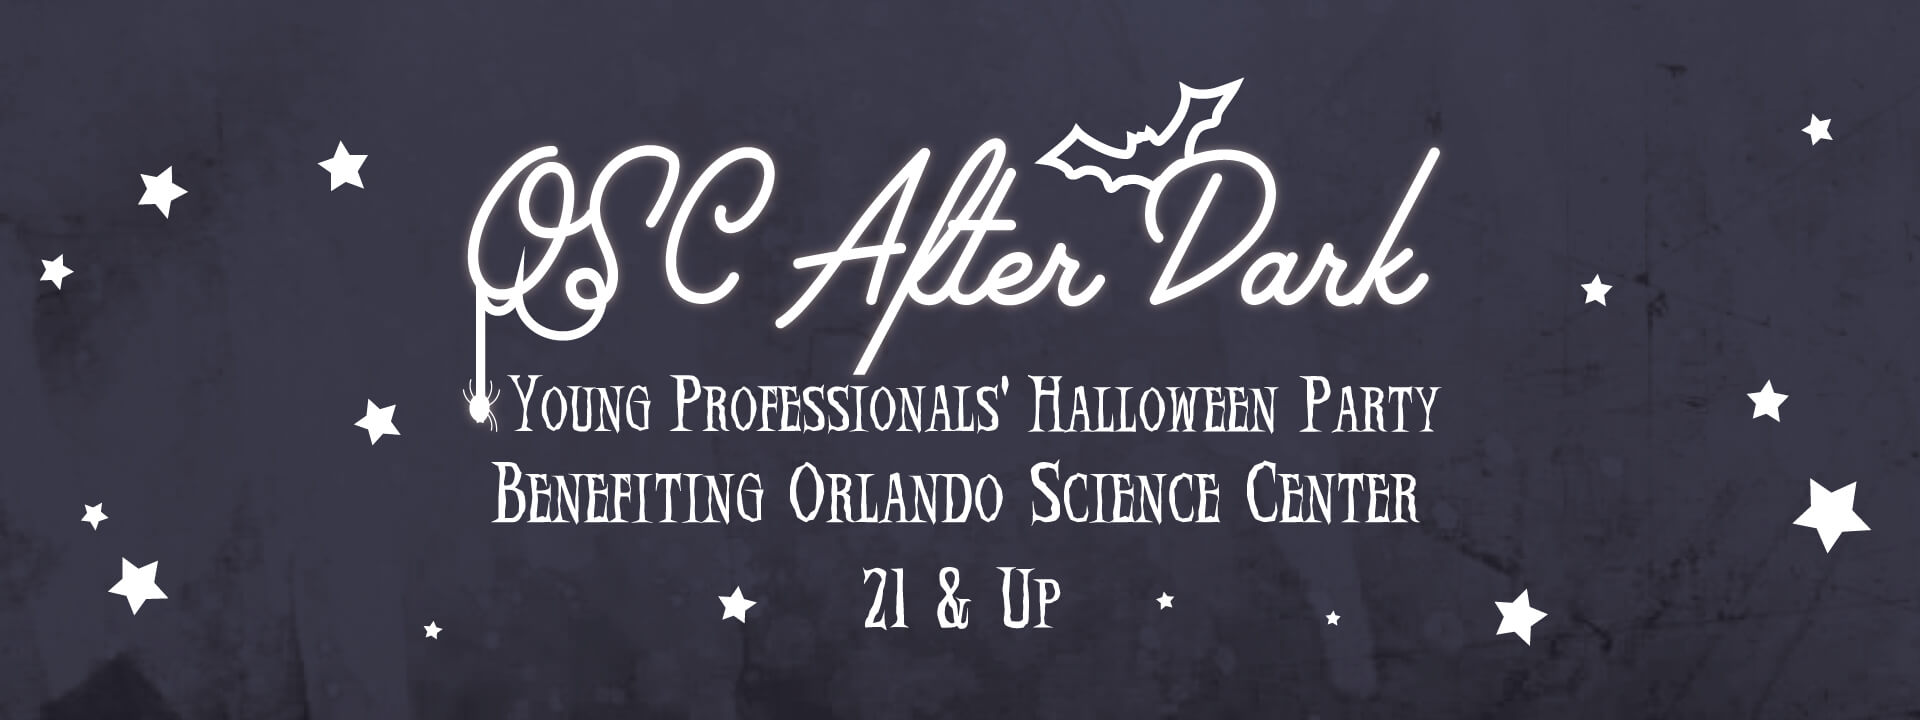 OSC After Dark – Young Professionals' Halloween Party Benefiting Orlando Science Center, 21 & Up